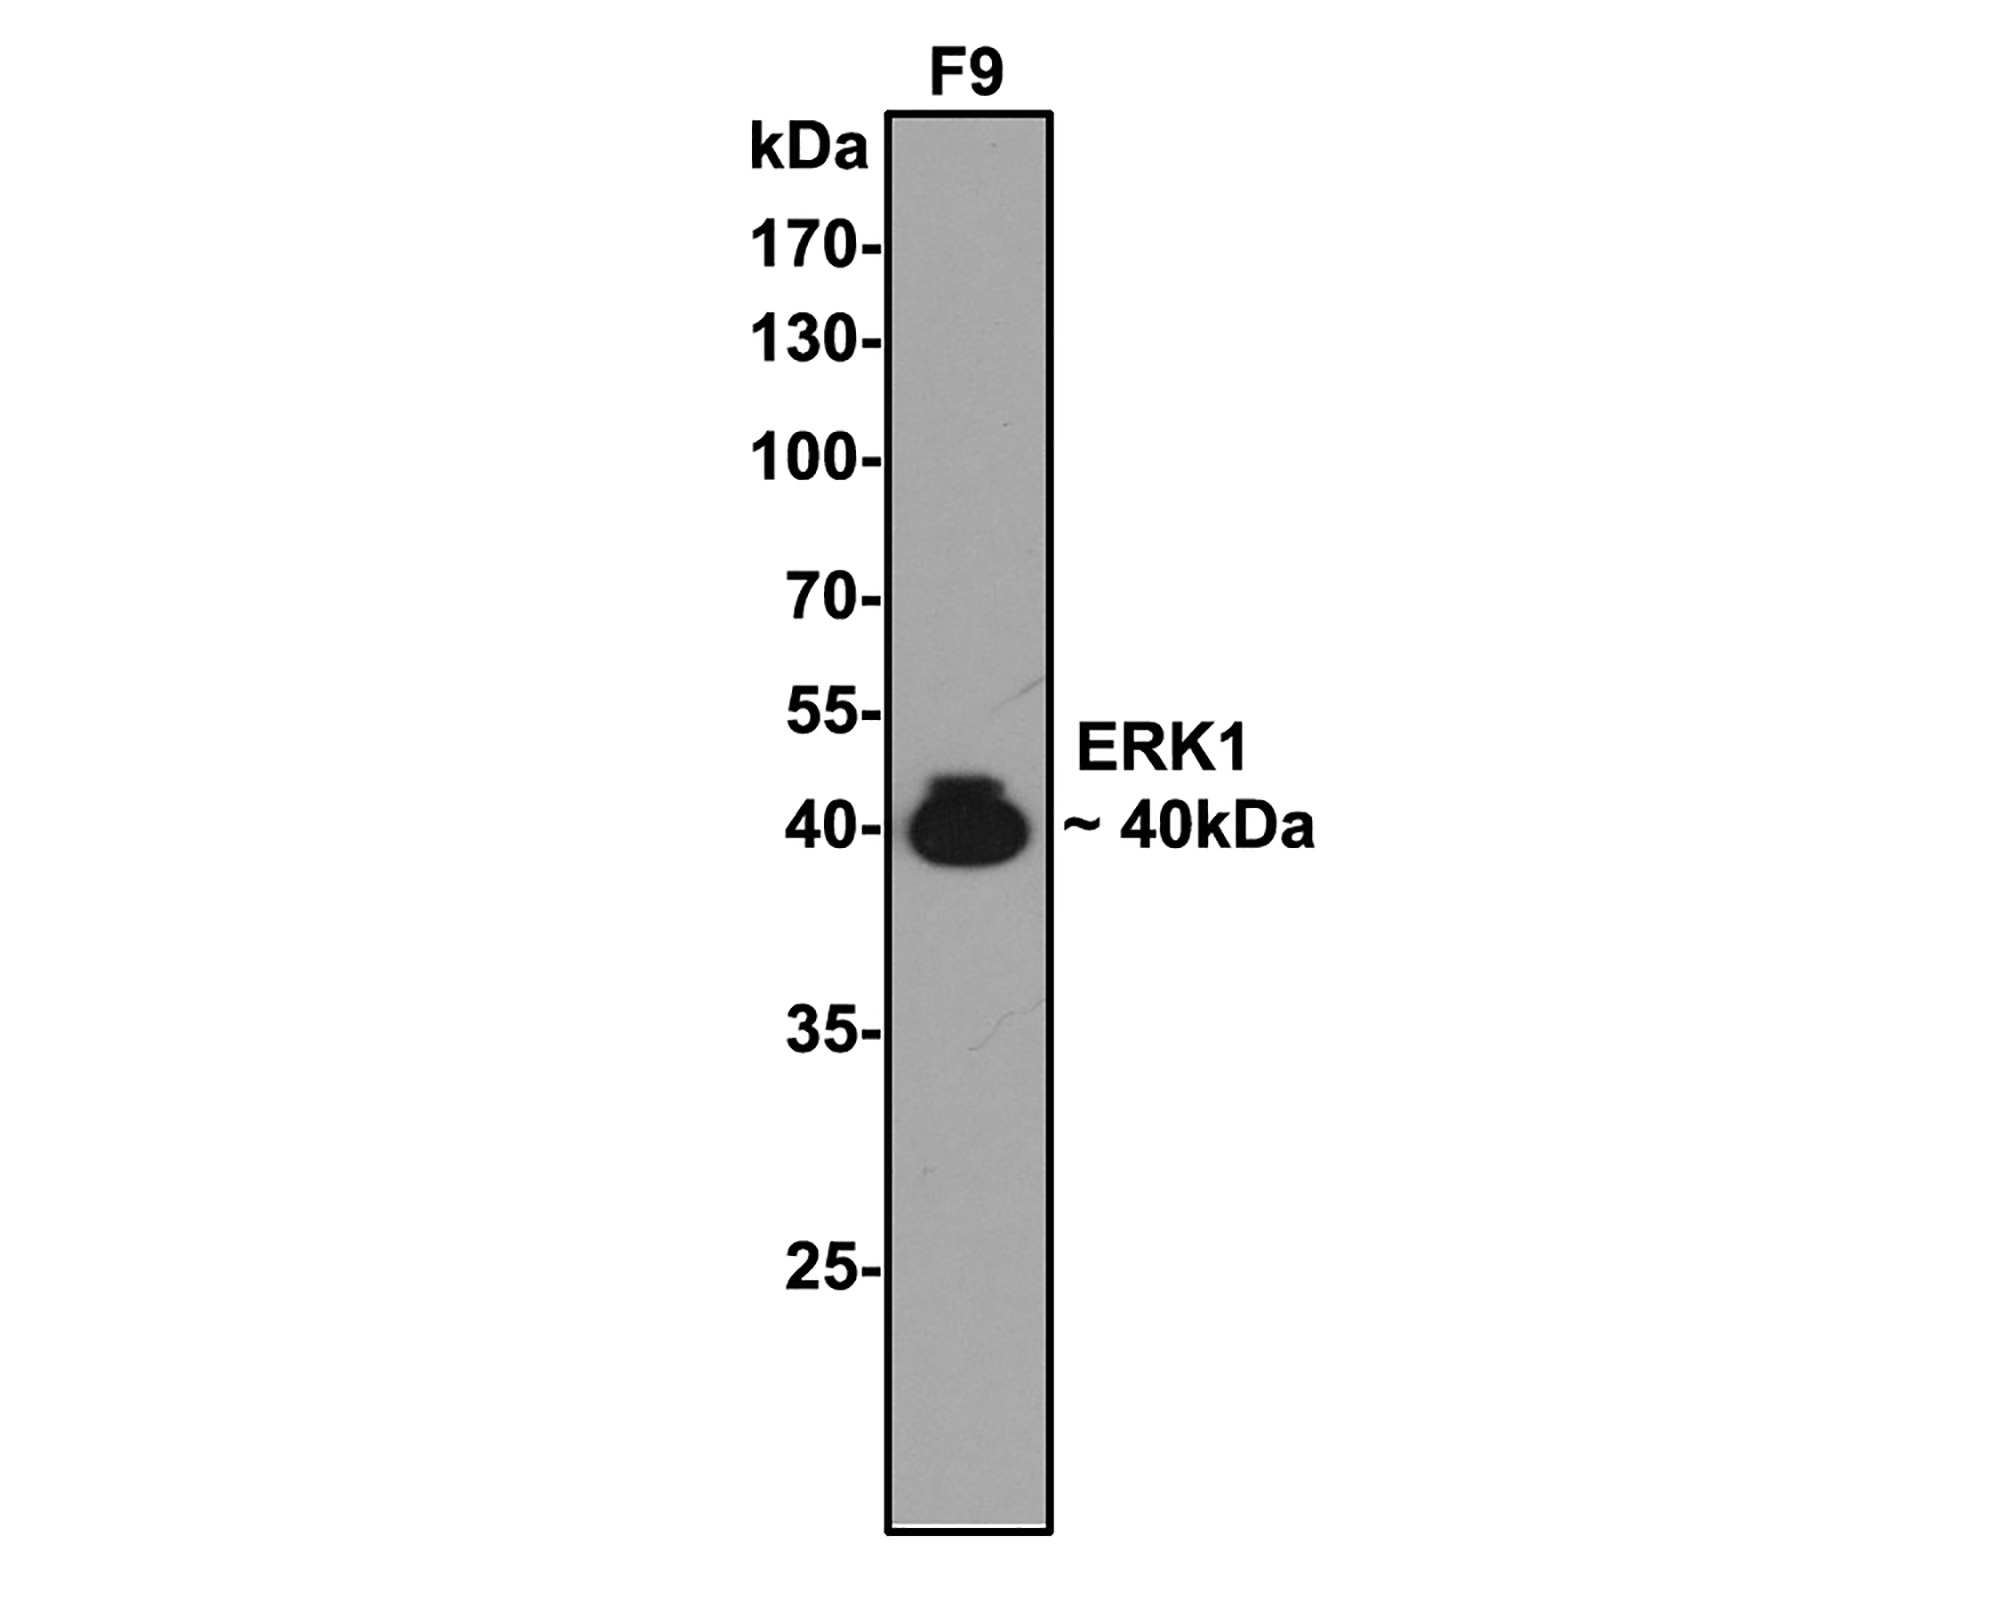 Western blot analysis of ERK1 on F9 cell lysates with Rabbit anti-ERK1 antibody (ER131011) at 1/5,000 dilution.<br />
<br />
Lysates/proteins at 10 µg/Lane.<br />
<br />
Predicted band size: 43 kDa<br />
Observed band size: 40 kDa<br />
<br />
Exposure time: 2 minutes;<br />
<br />
10% SDS-PAGE gel.<br />
<br />
Proteins were transferred to a PVDF membrane and blocked with 5% NFDM/TBST for 1 hour at room temperature. The primary antibody (ER131011) at 1/5,000 dilution was used in 5% NFDM/TBST at room temperature for 2 hours. Goat Anti-Rabbit IgG - HRP Secondary Antibody (HA1001) at 1:300,000 dilution was used for 1 hour at room temperature.